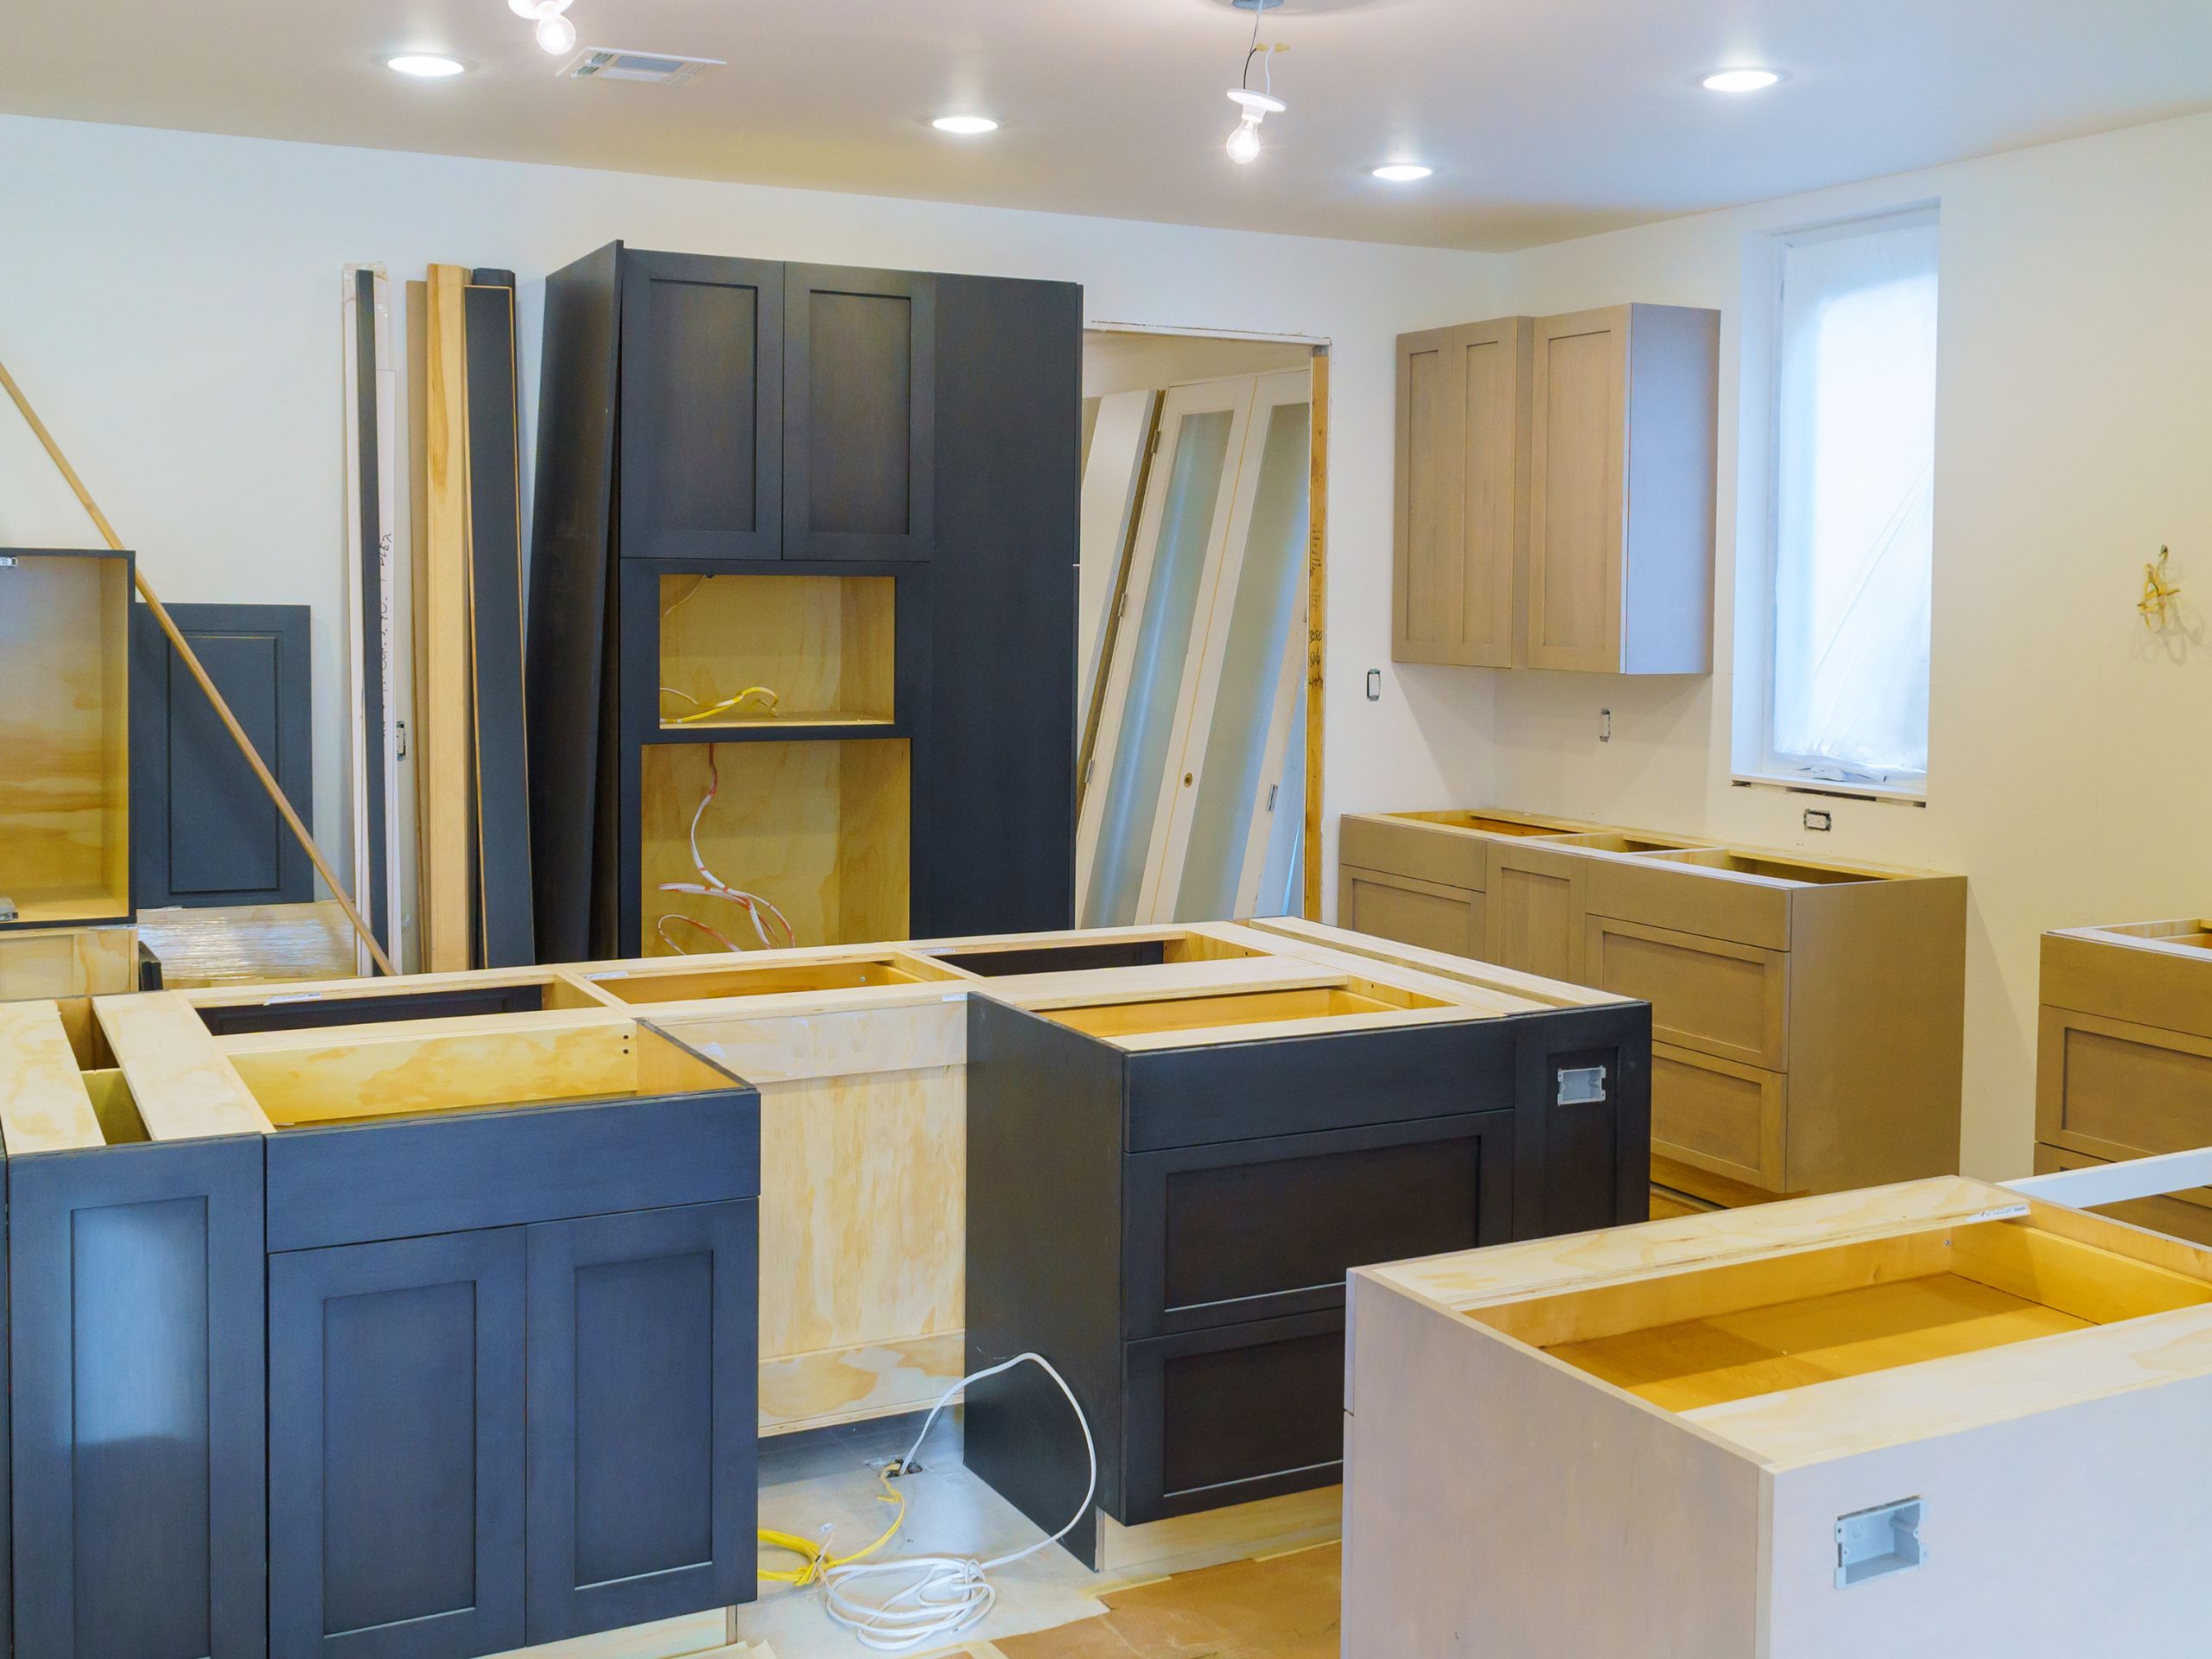 What to Expect When You’re Remodeling